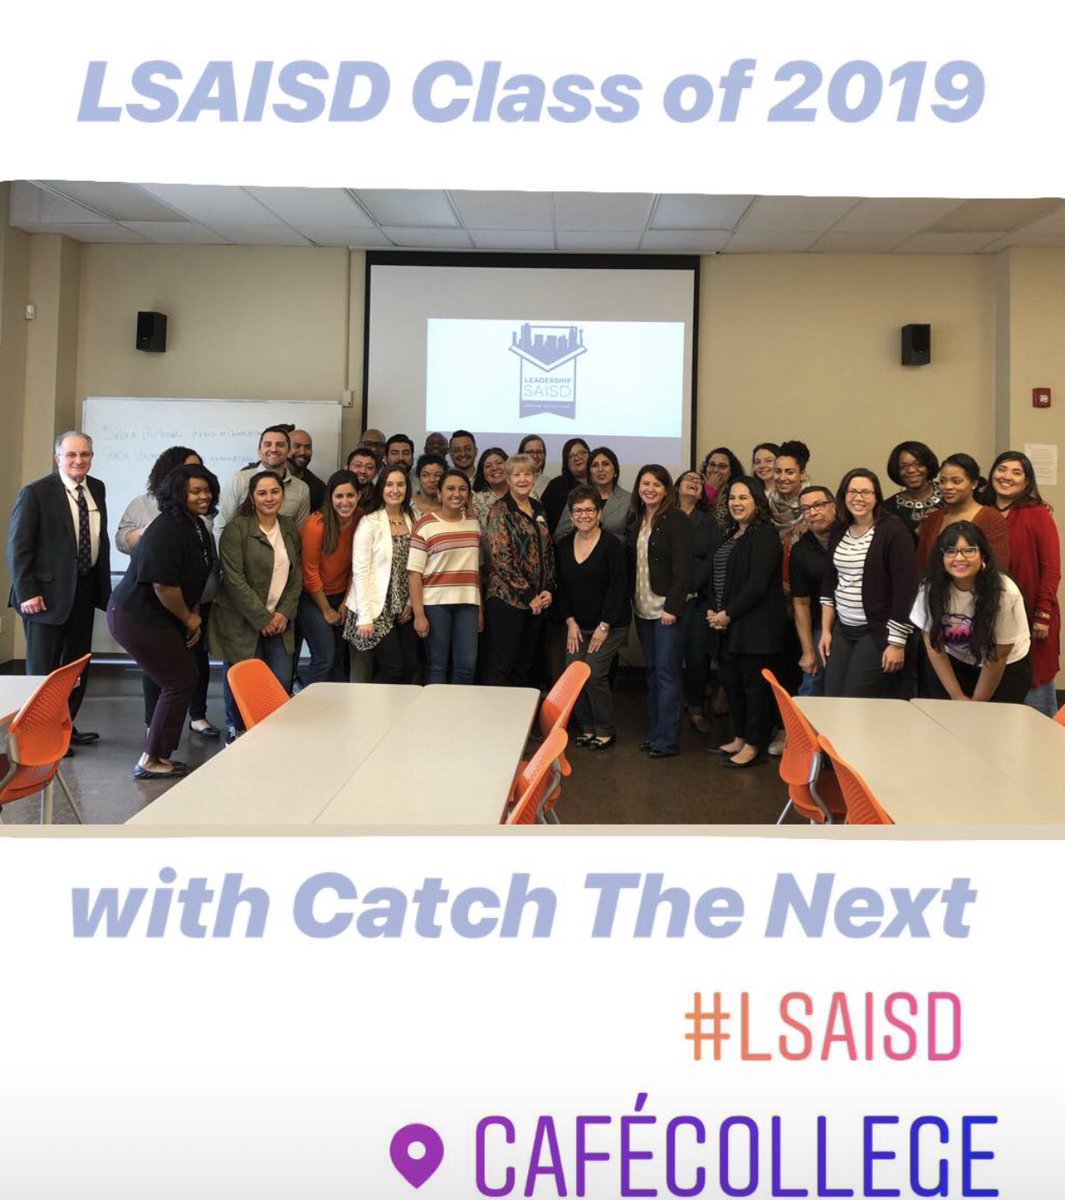 Leadership SAISD Class of 2019 learning about data and research in education. A huge shout out to @P16Plus, @SA2020, and Catch The Next for joining us and sharing of your expertise. #LSAISD #informstransform